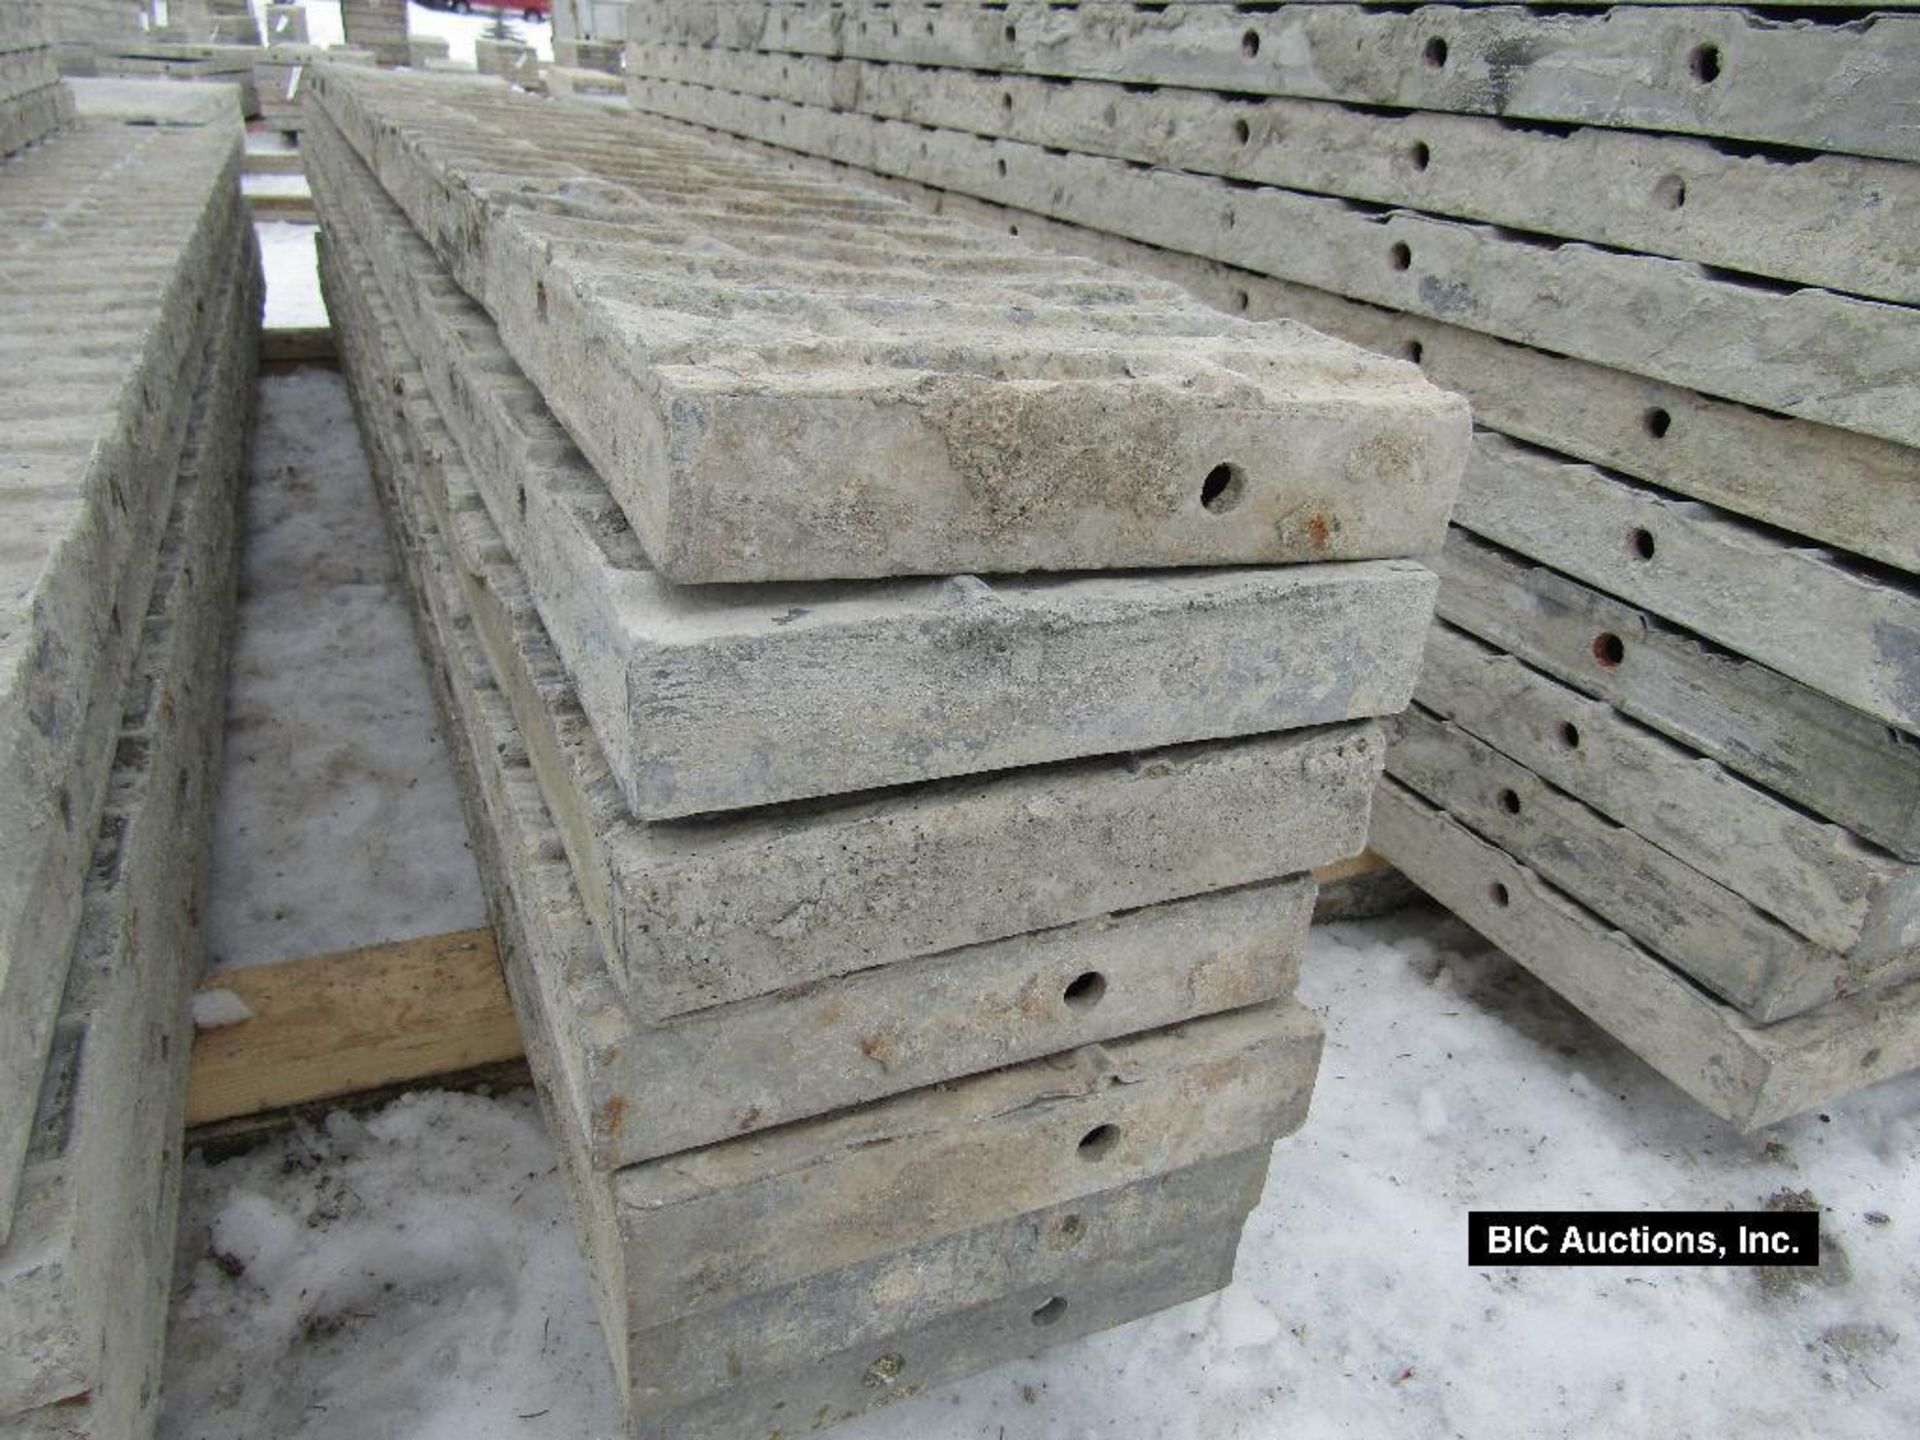 (7) 11" x 9' Durand Aluminum Concrete Forms, Textured Brick, 8" Hole Pattern, Located in Waldo, WI - Image 2 of 2